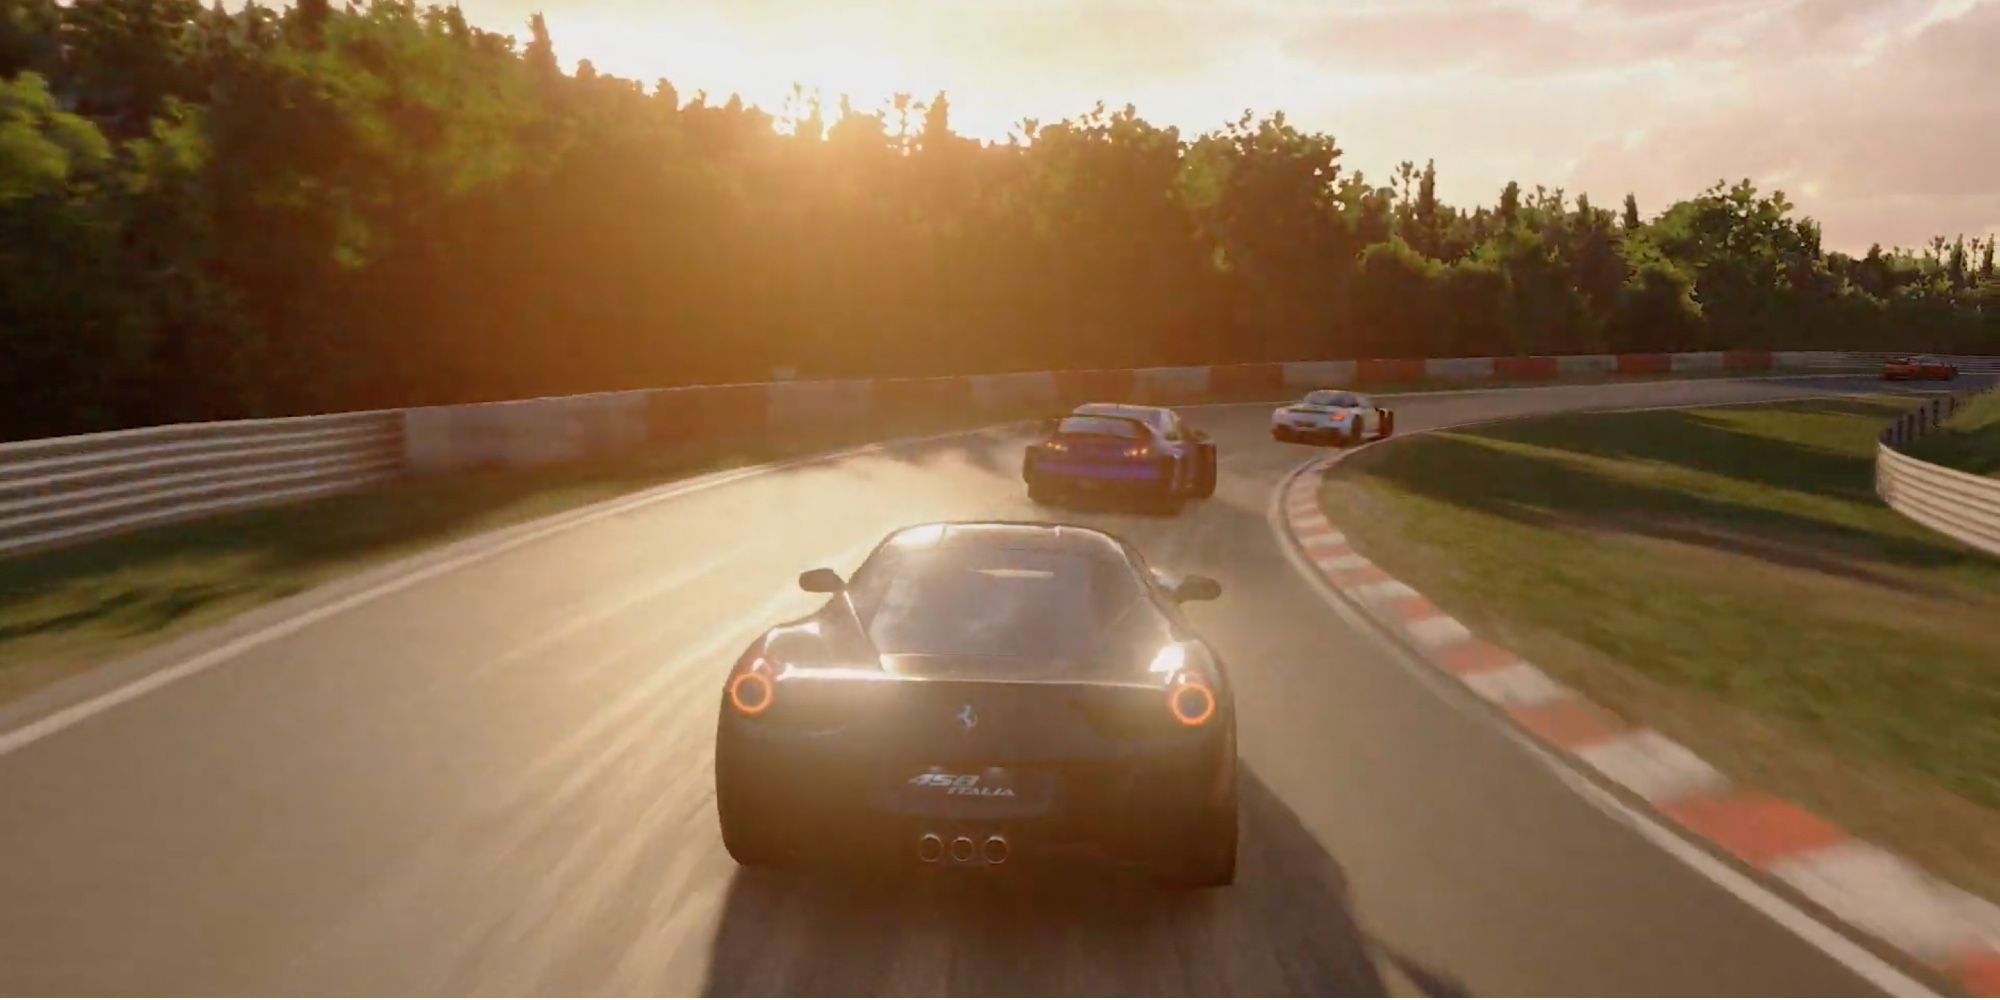 Realistic Racing Games - Gran Turismo Sport - Player trying to overtake opponents in the race